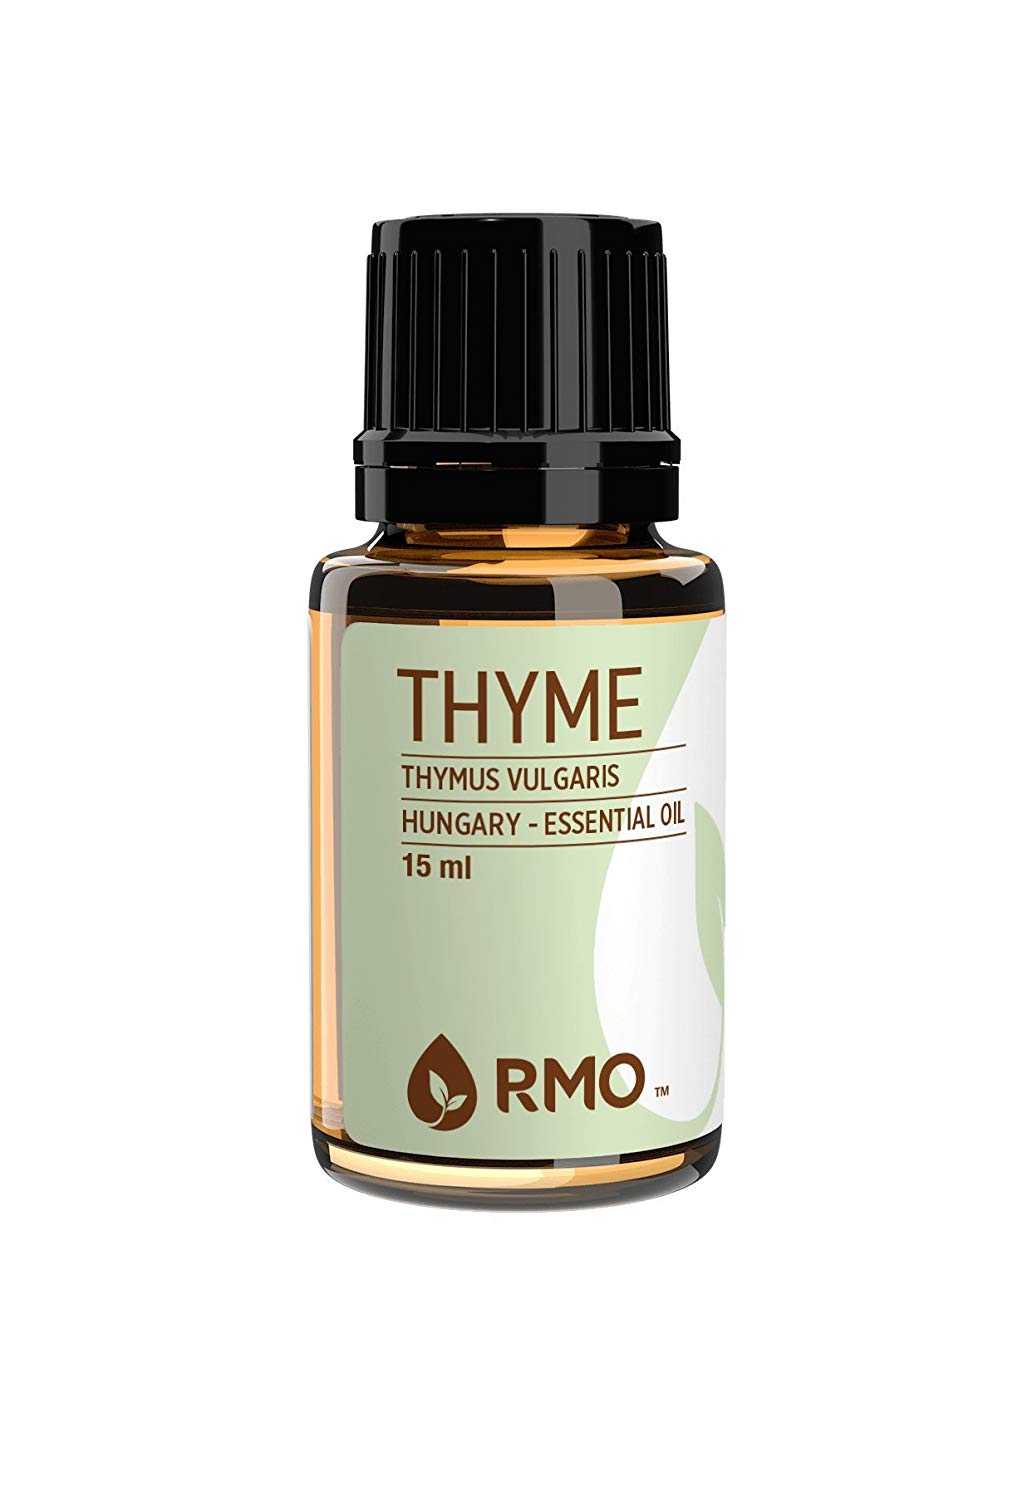 Thyme oil benefits for anxiety and inflammation